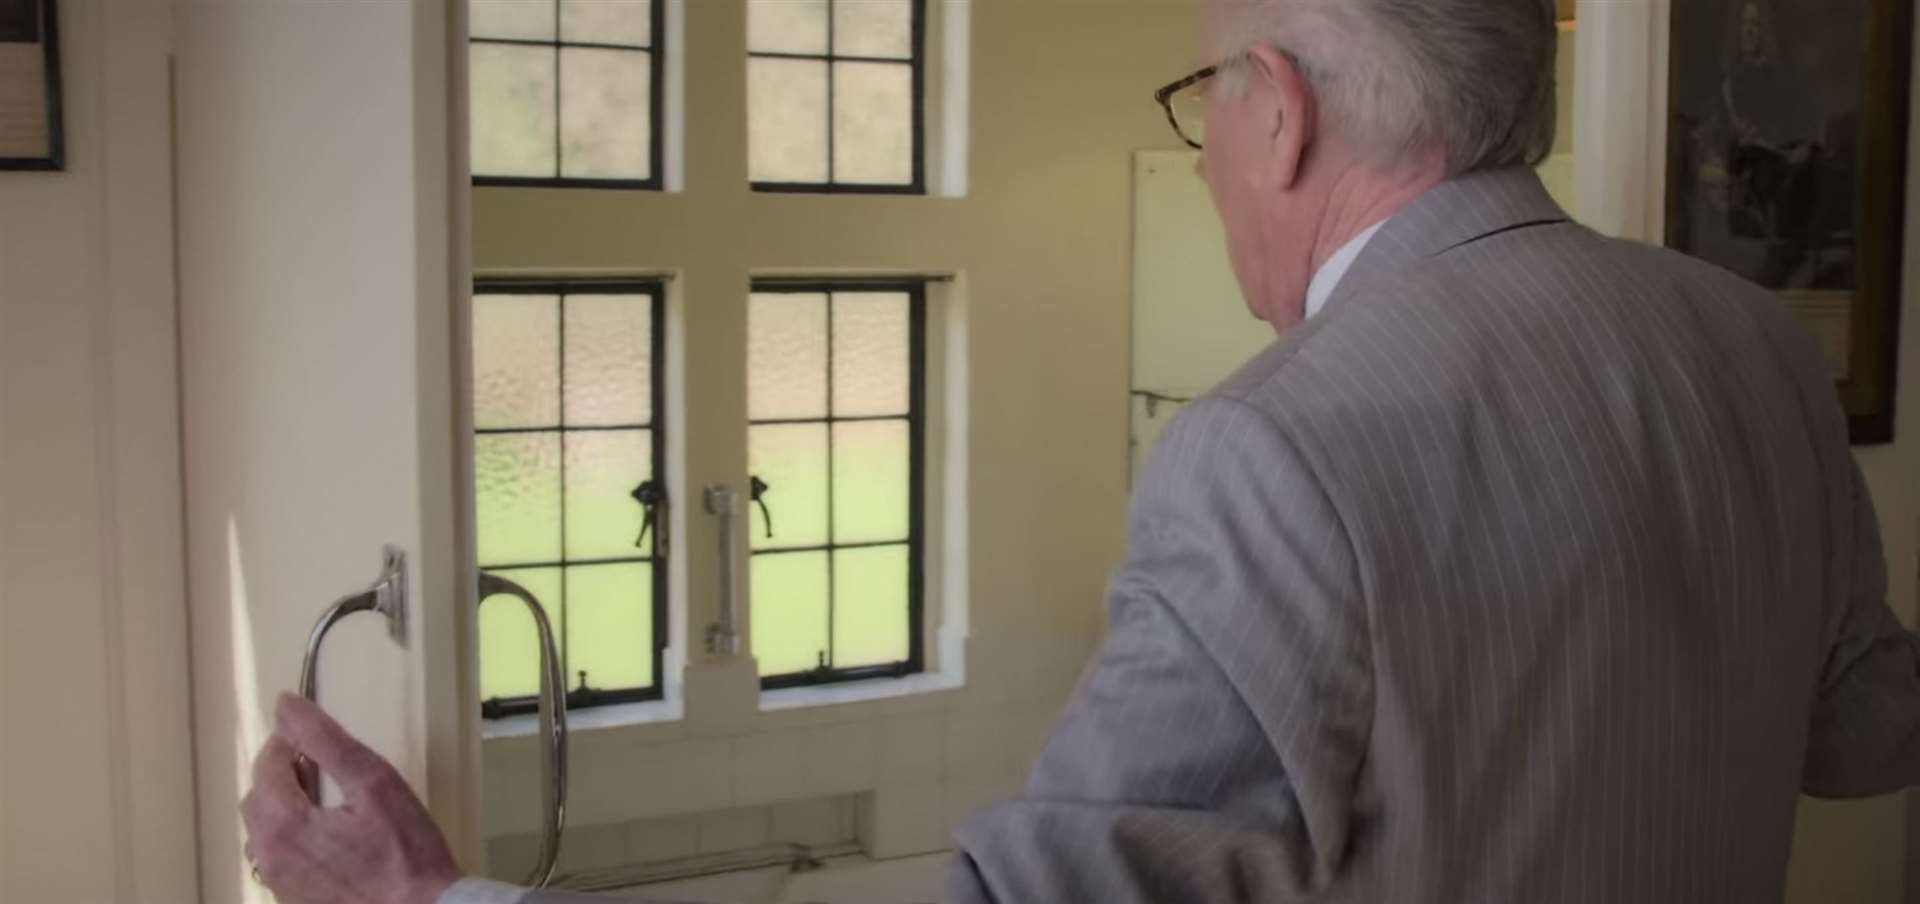 The moment where Michael discovered the secret bathroom in Chartwell. Still from 'Jack Whitehall: Travels With My Father'. Credit: Netflix